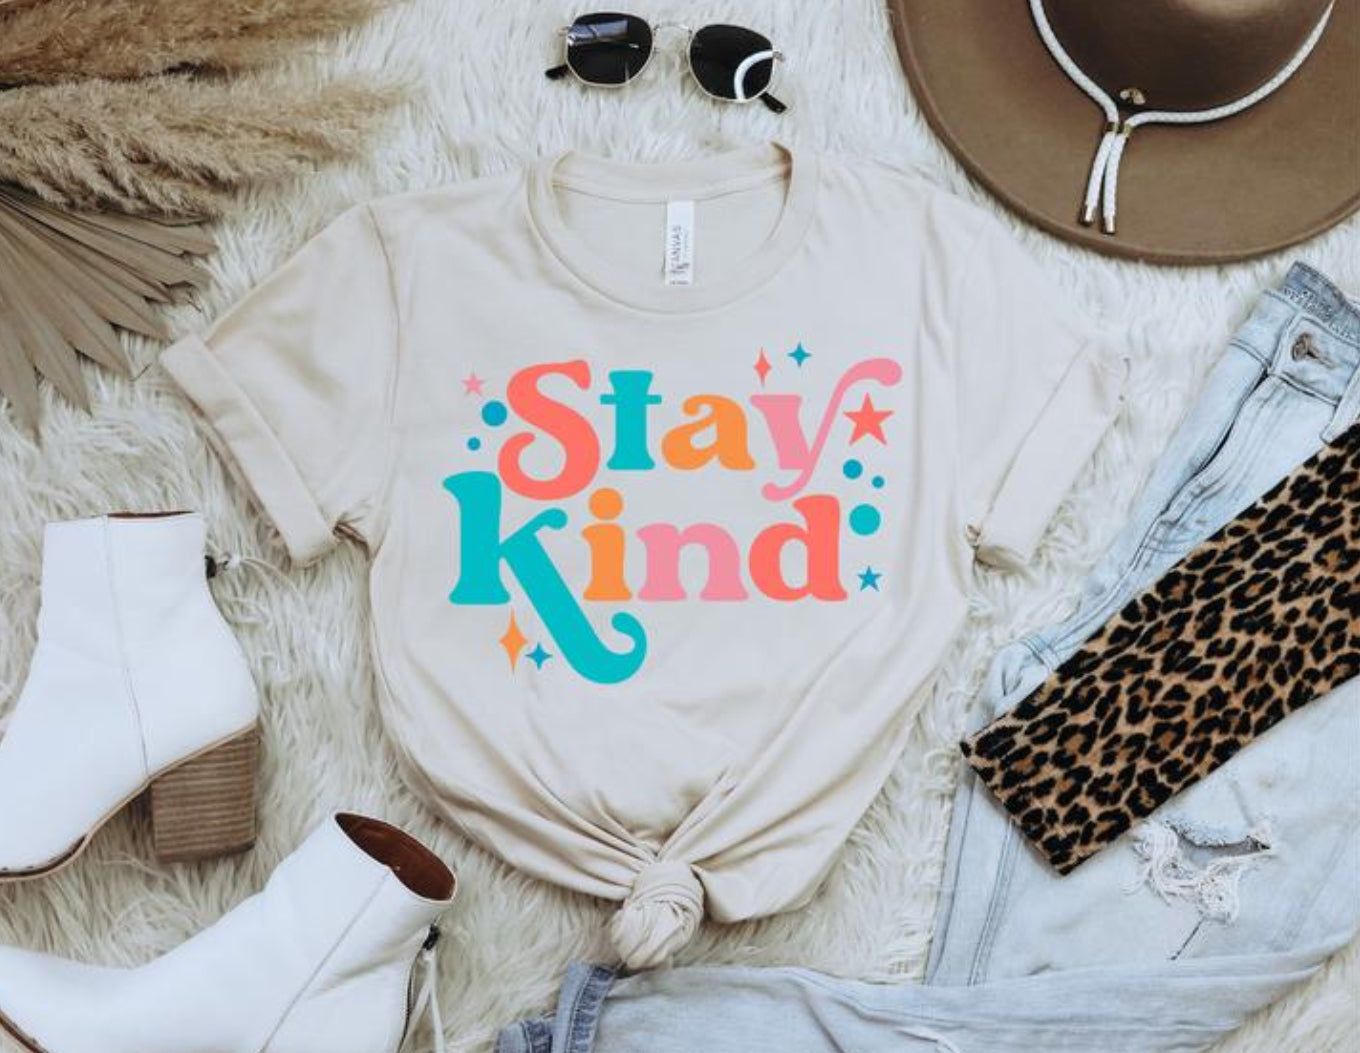 STAY KIND